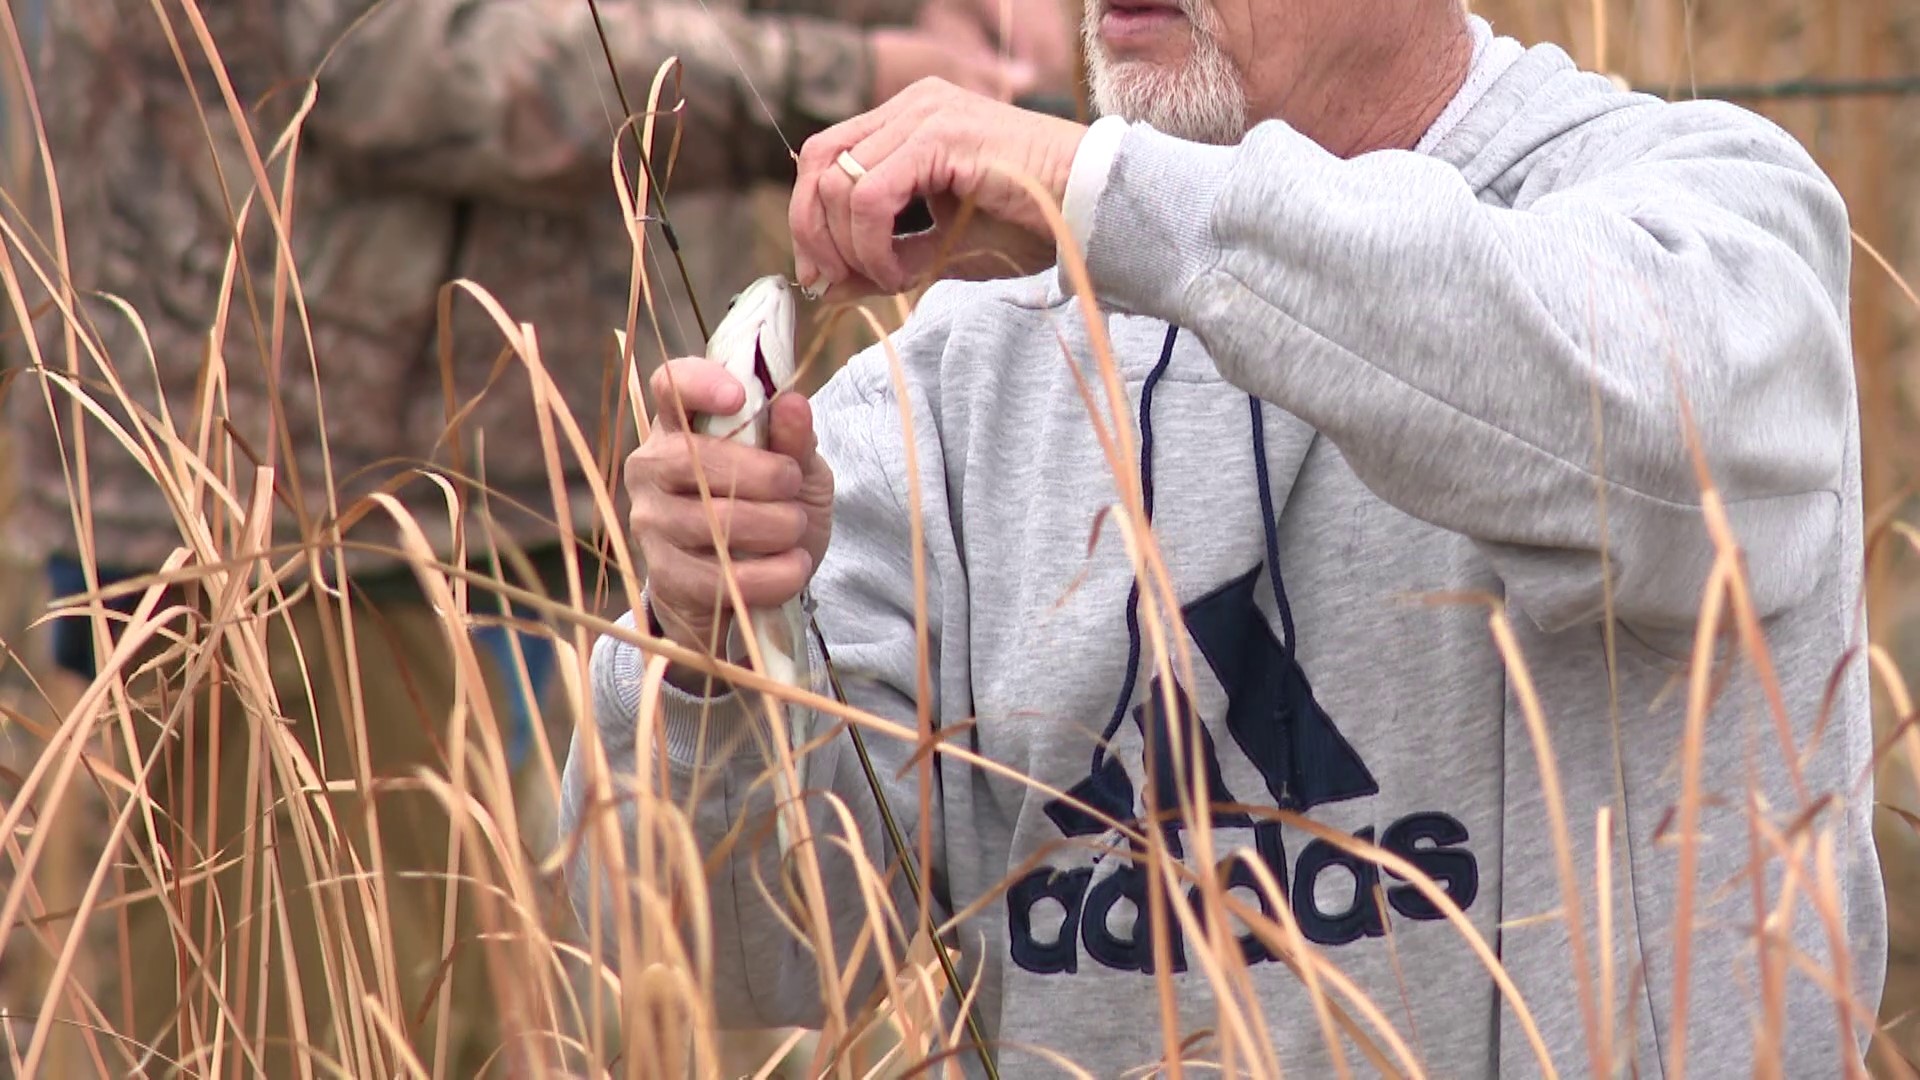 The event in Johnston was part of the Iowa DNR's community trout stocking program that will continue through the end of November.